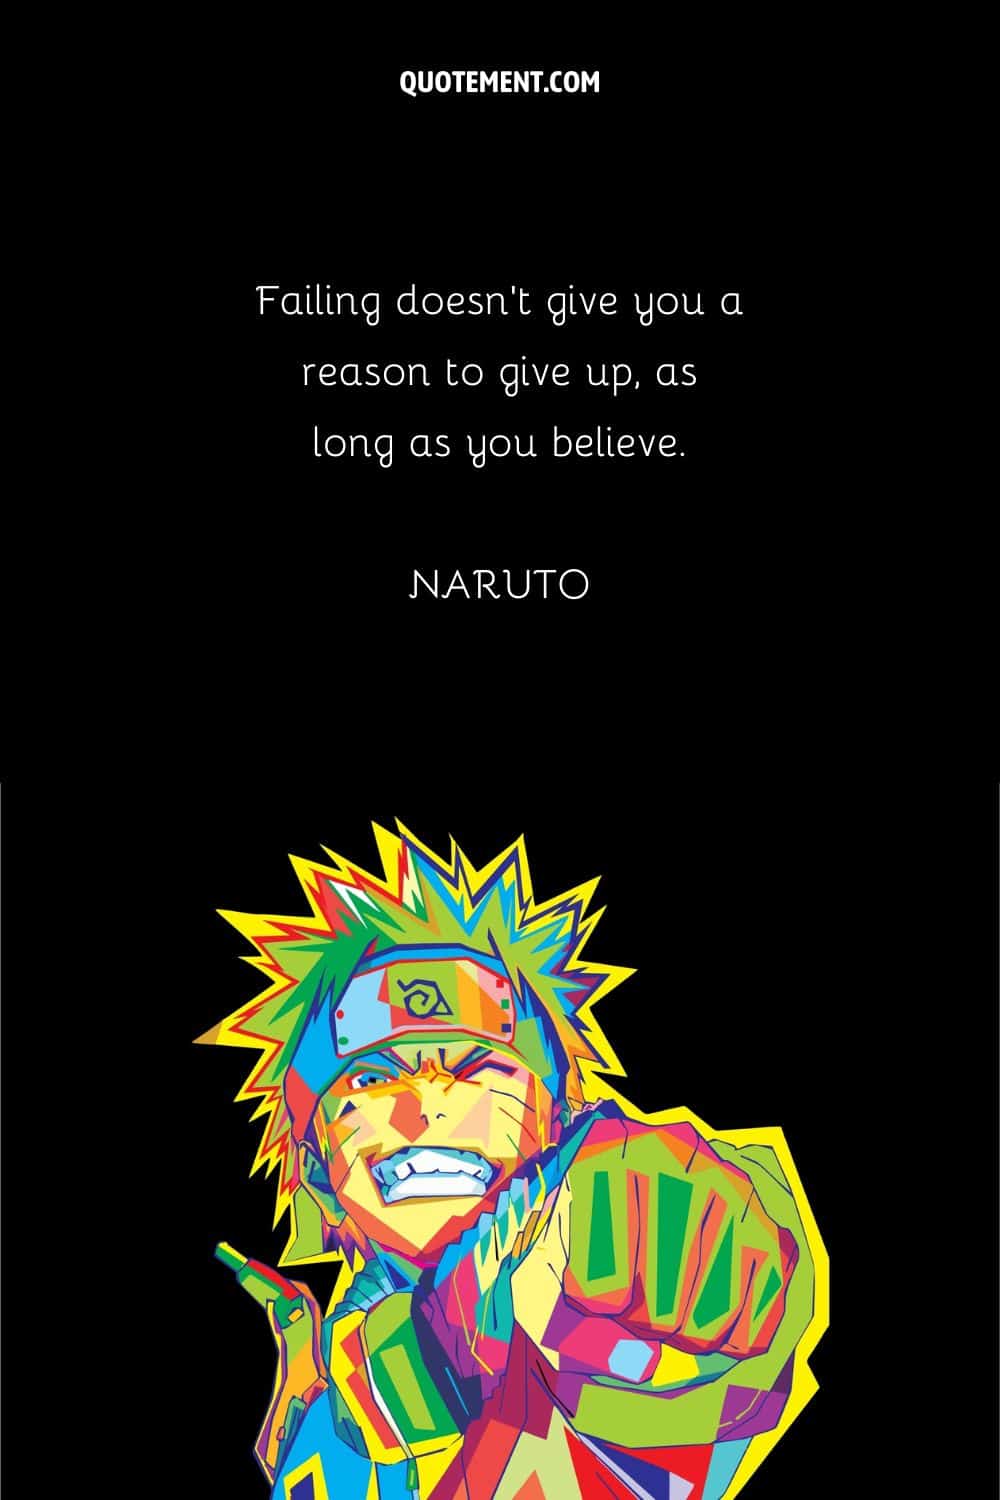 Naruto with fronting fist image representing the best Naruto quote